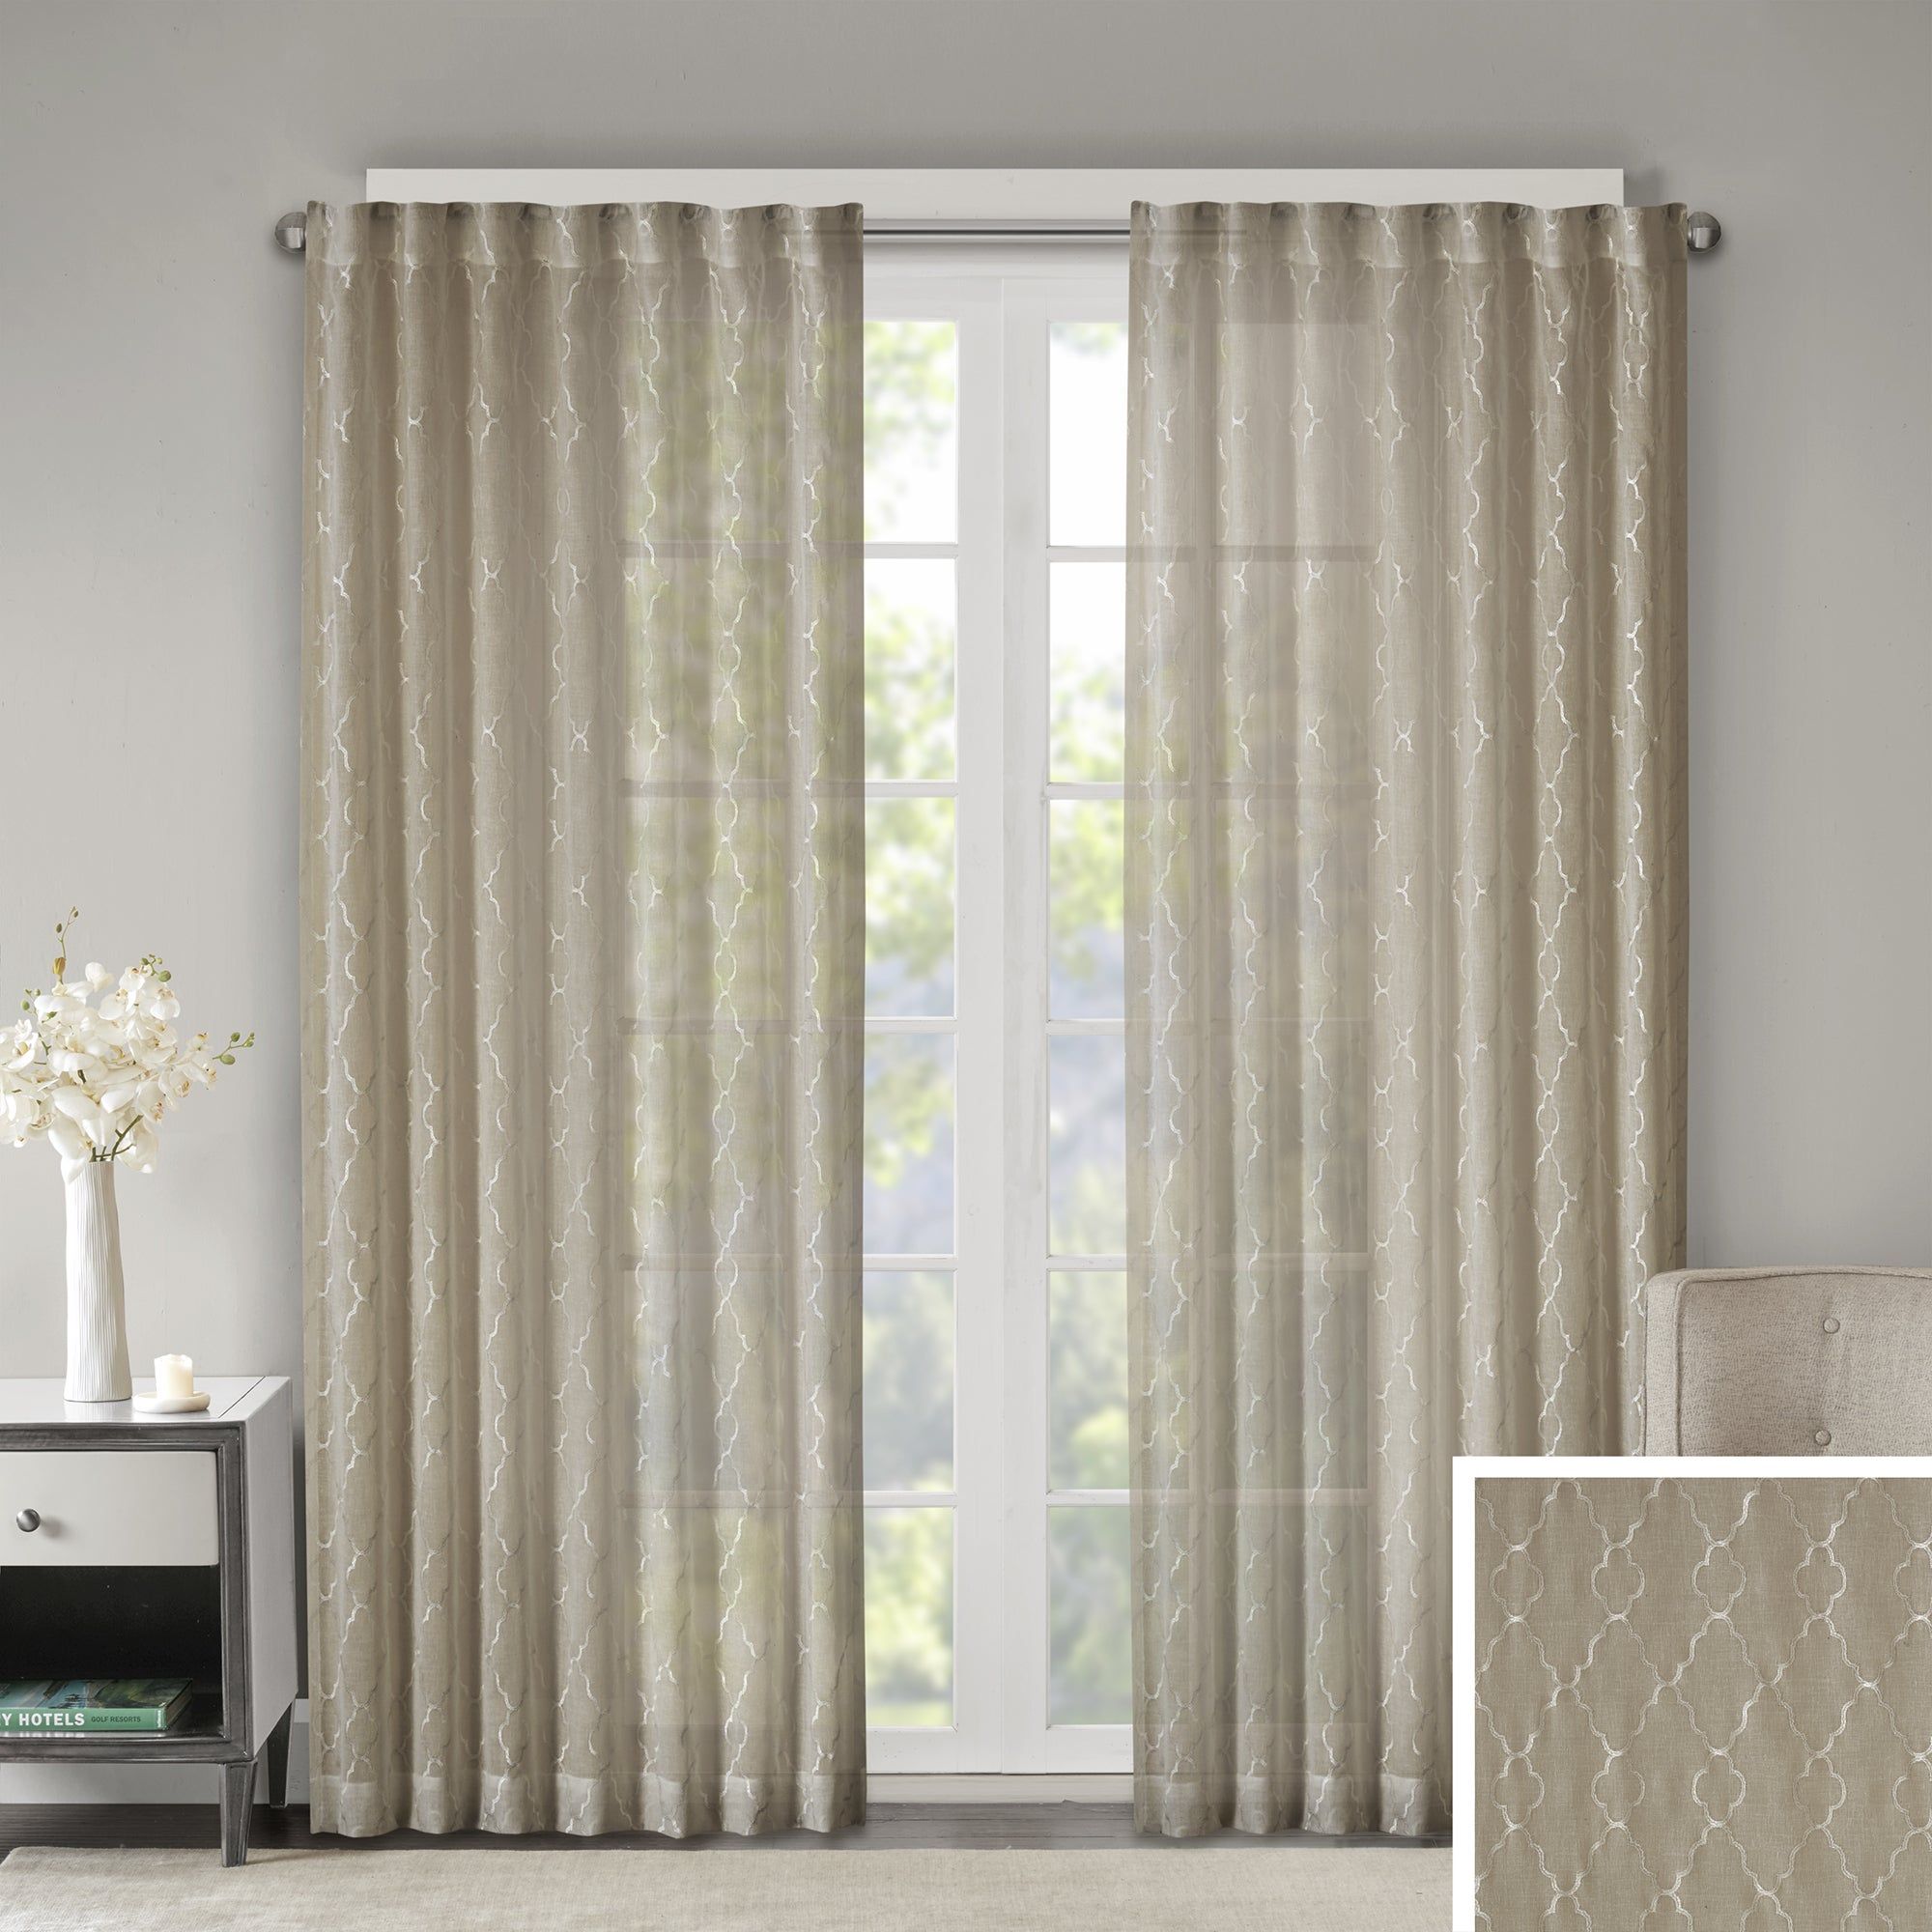 Madison Park Etelle Fret Embroidered Sheer Curtain Panel With Kida Embroidered Sheer Curtain Panels (View 17 of 20)